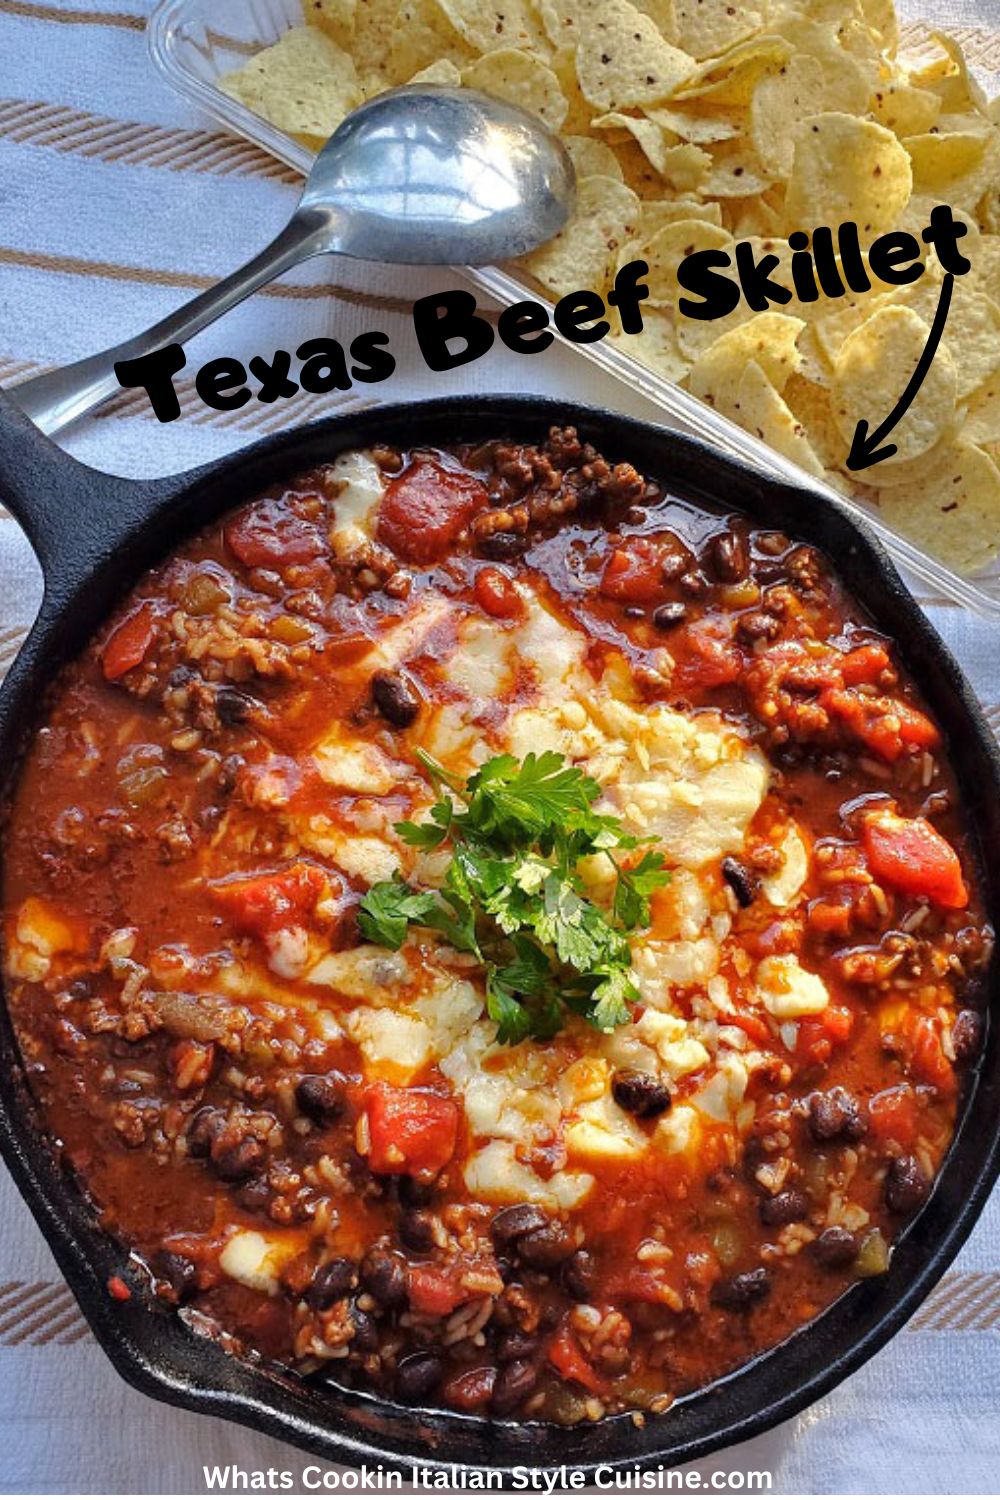 pin for later a skillet filled with rice beans and beef with sauce called Texas Beef Skillet